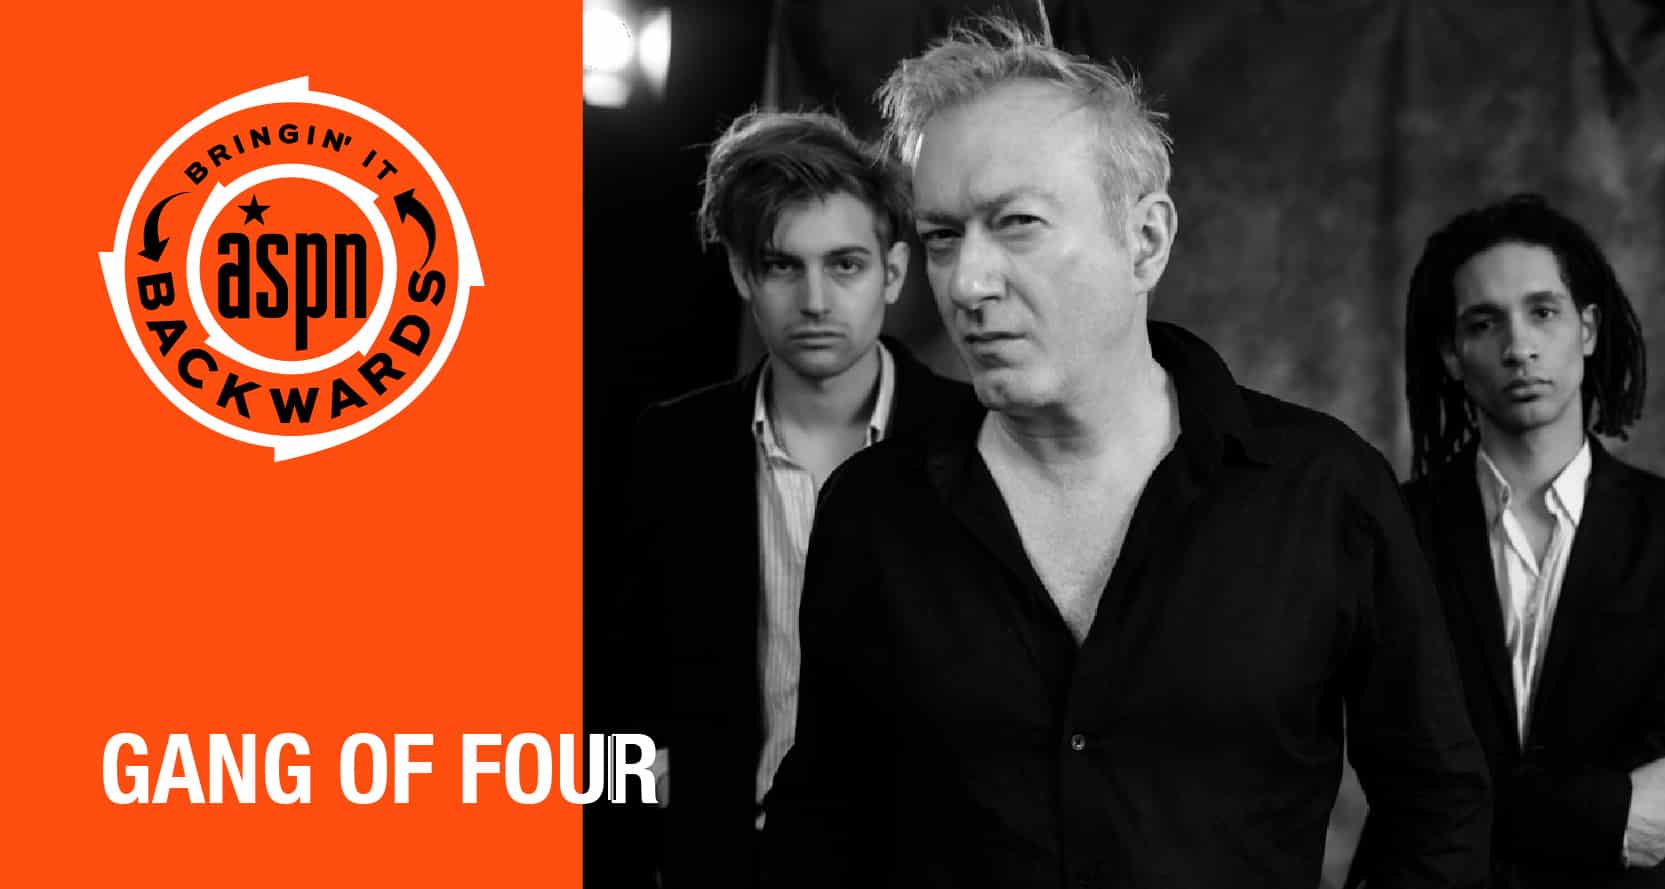 Bringin’ it Backwards: Interview with Gang of Four